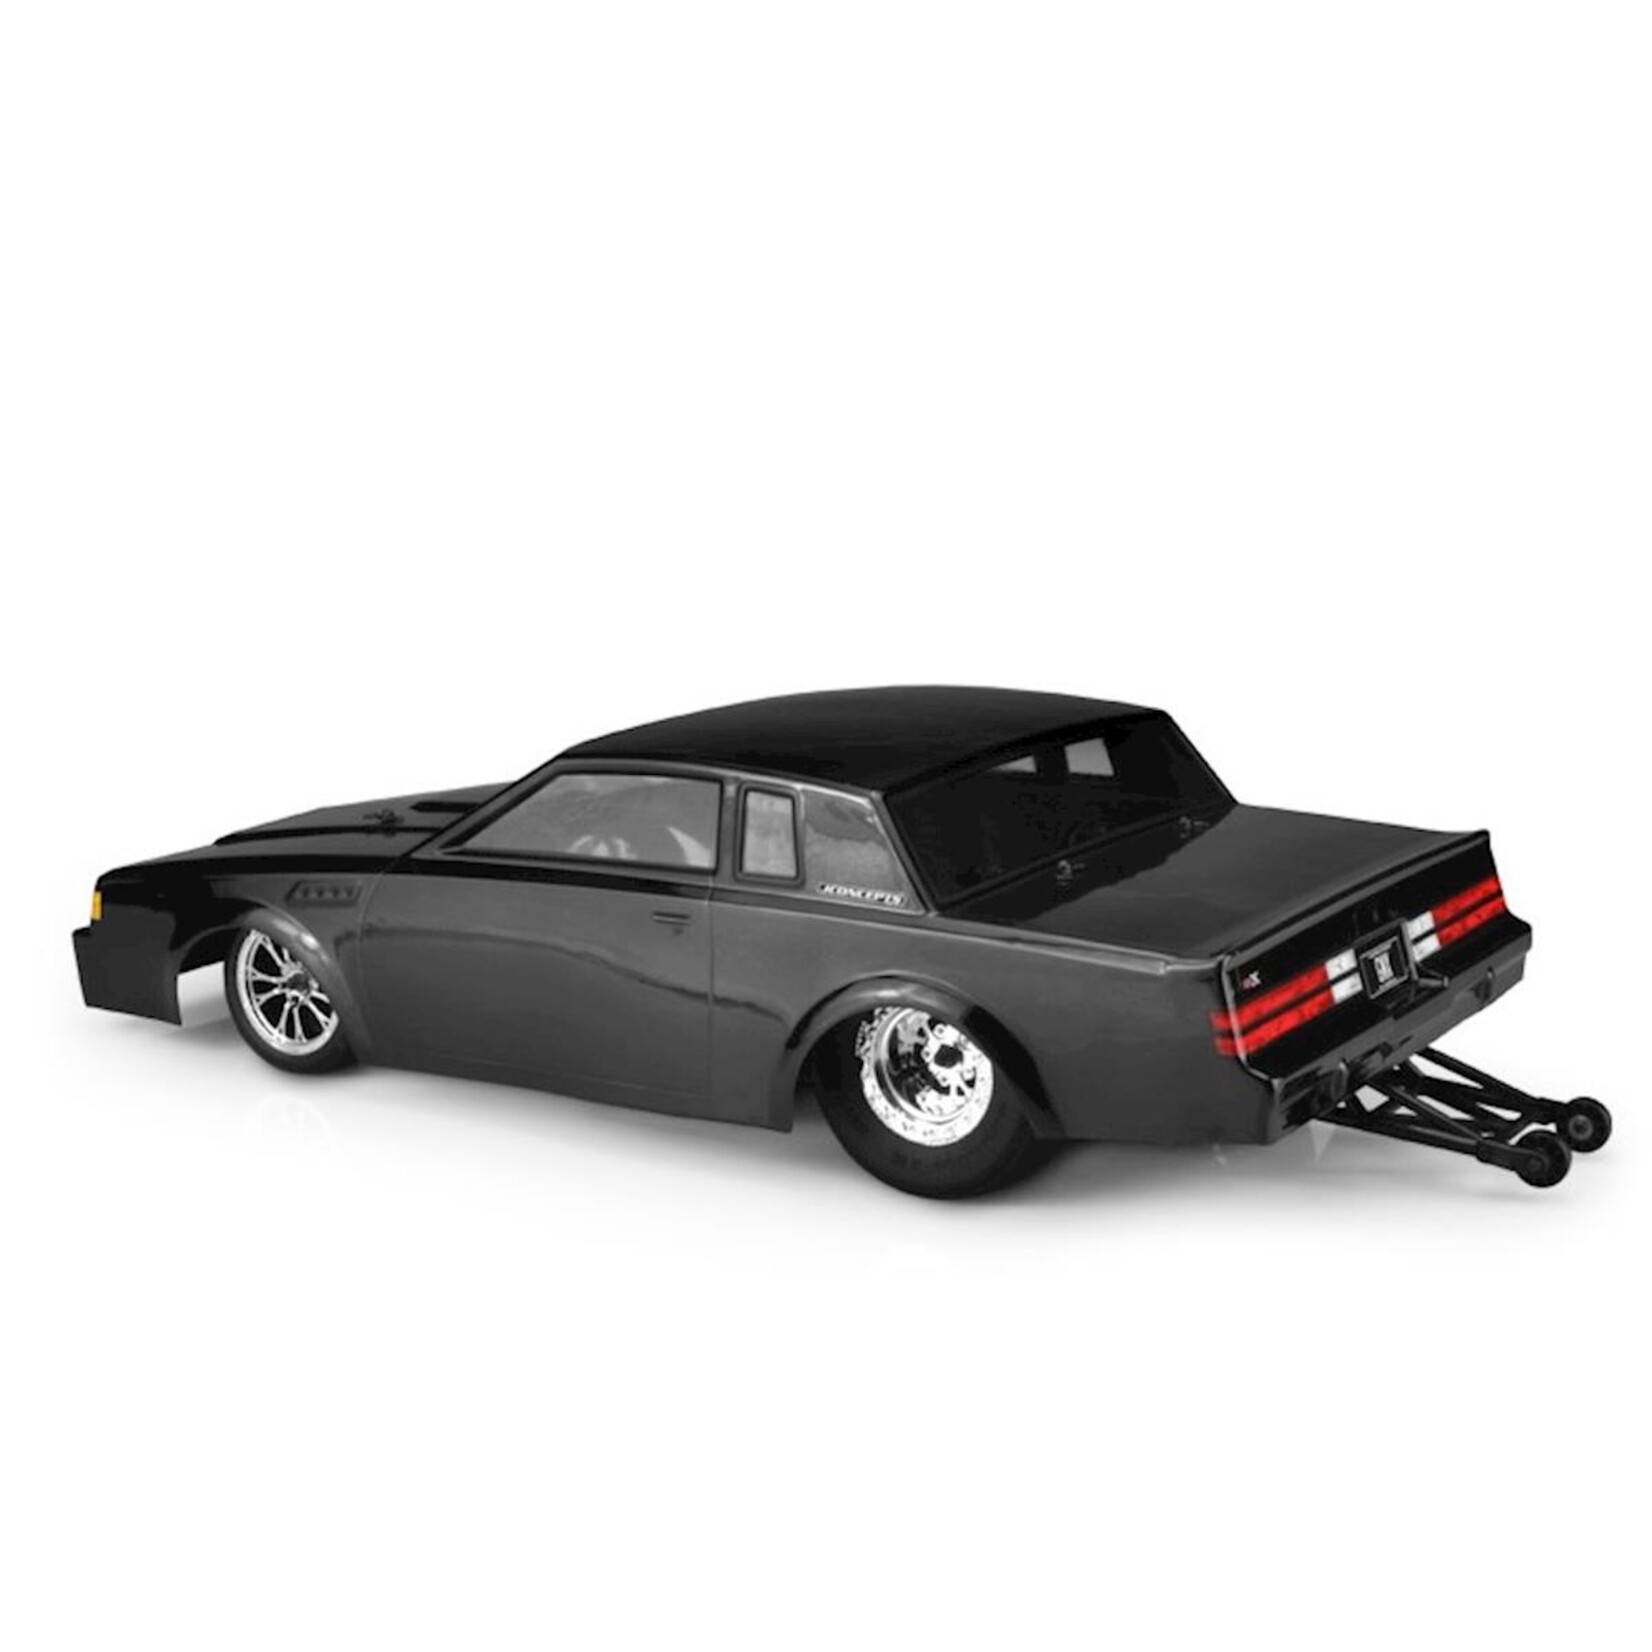 JConcepts JConcepts 1987 Buick Grand National Street Eliminator Drag Racing Body (Clear) #0357